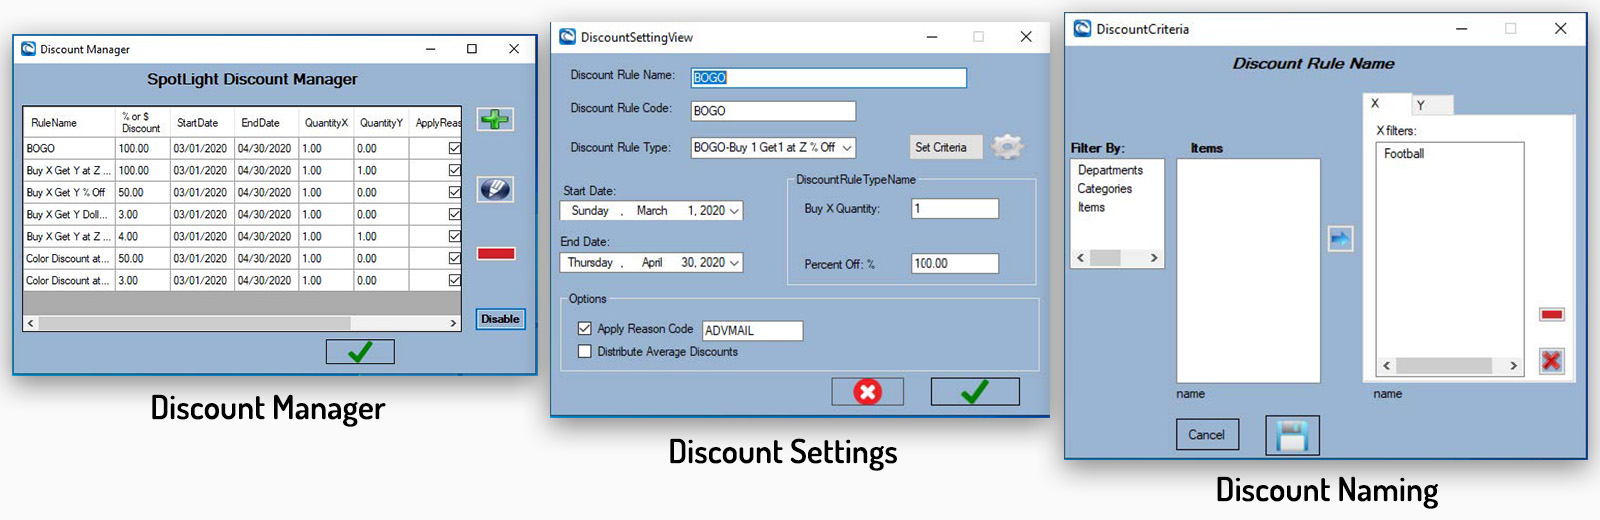 SpotLight for RMH - Discount Manager Screens